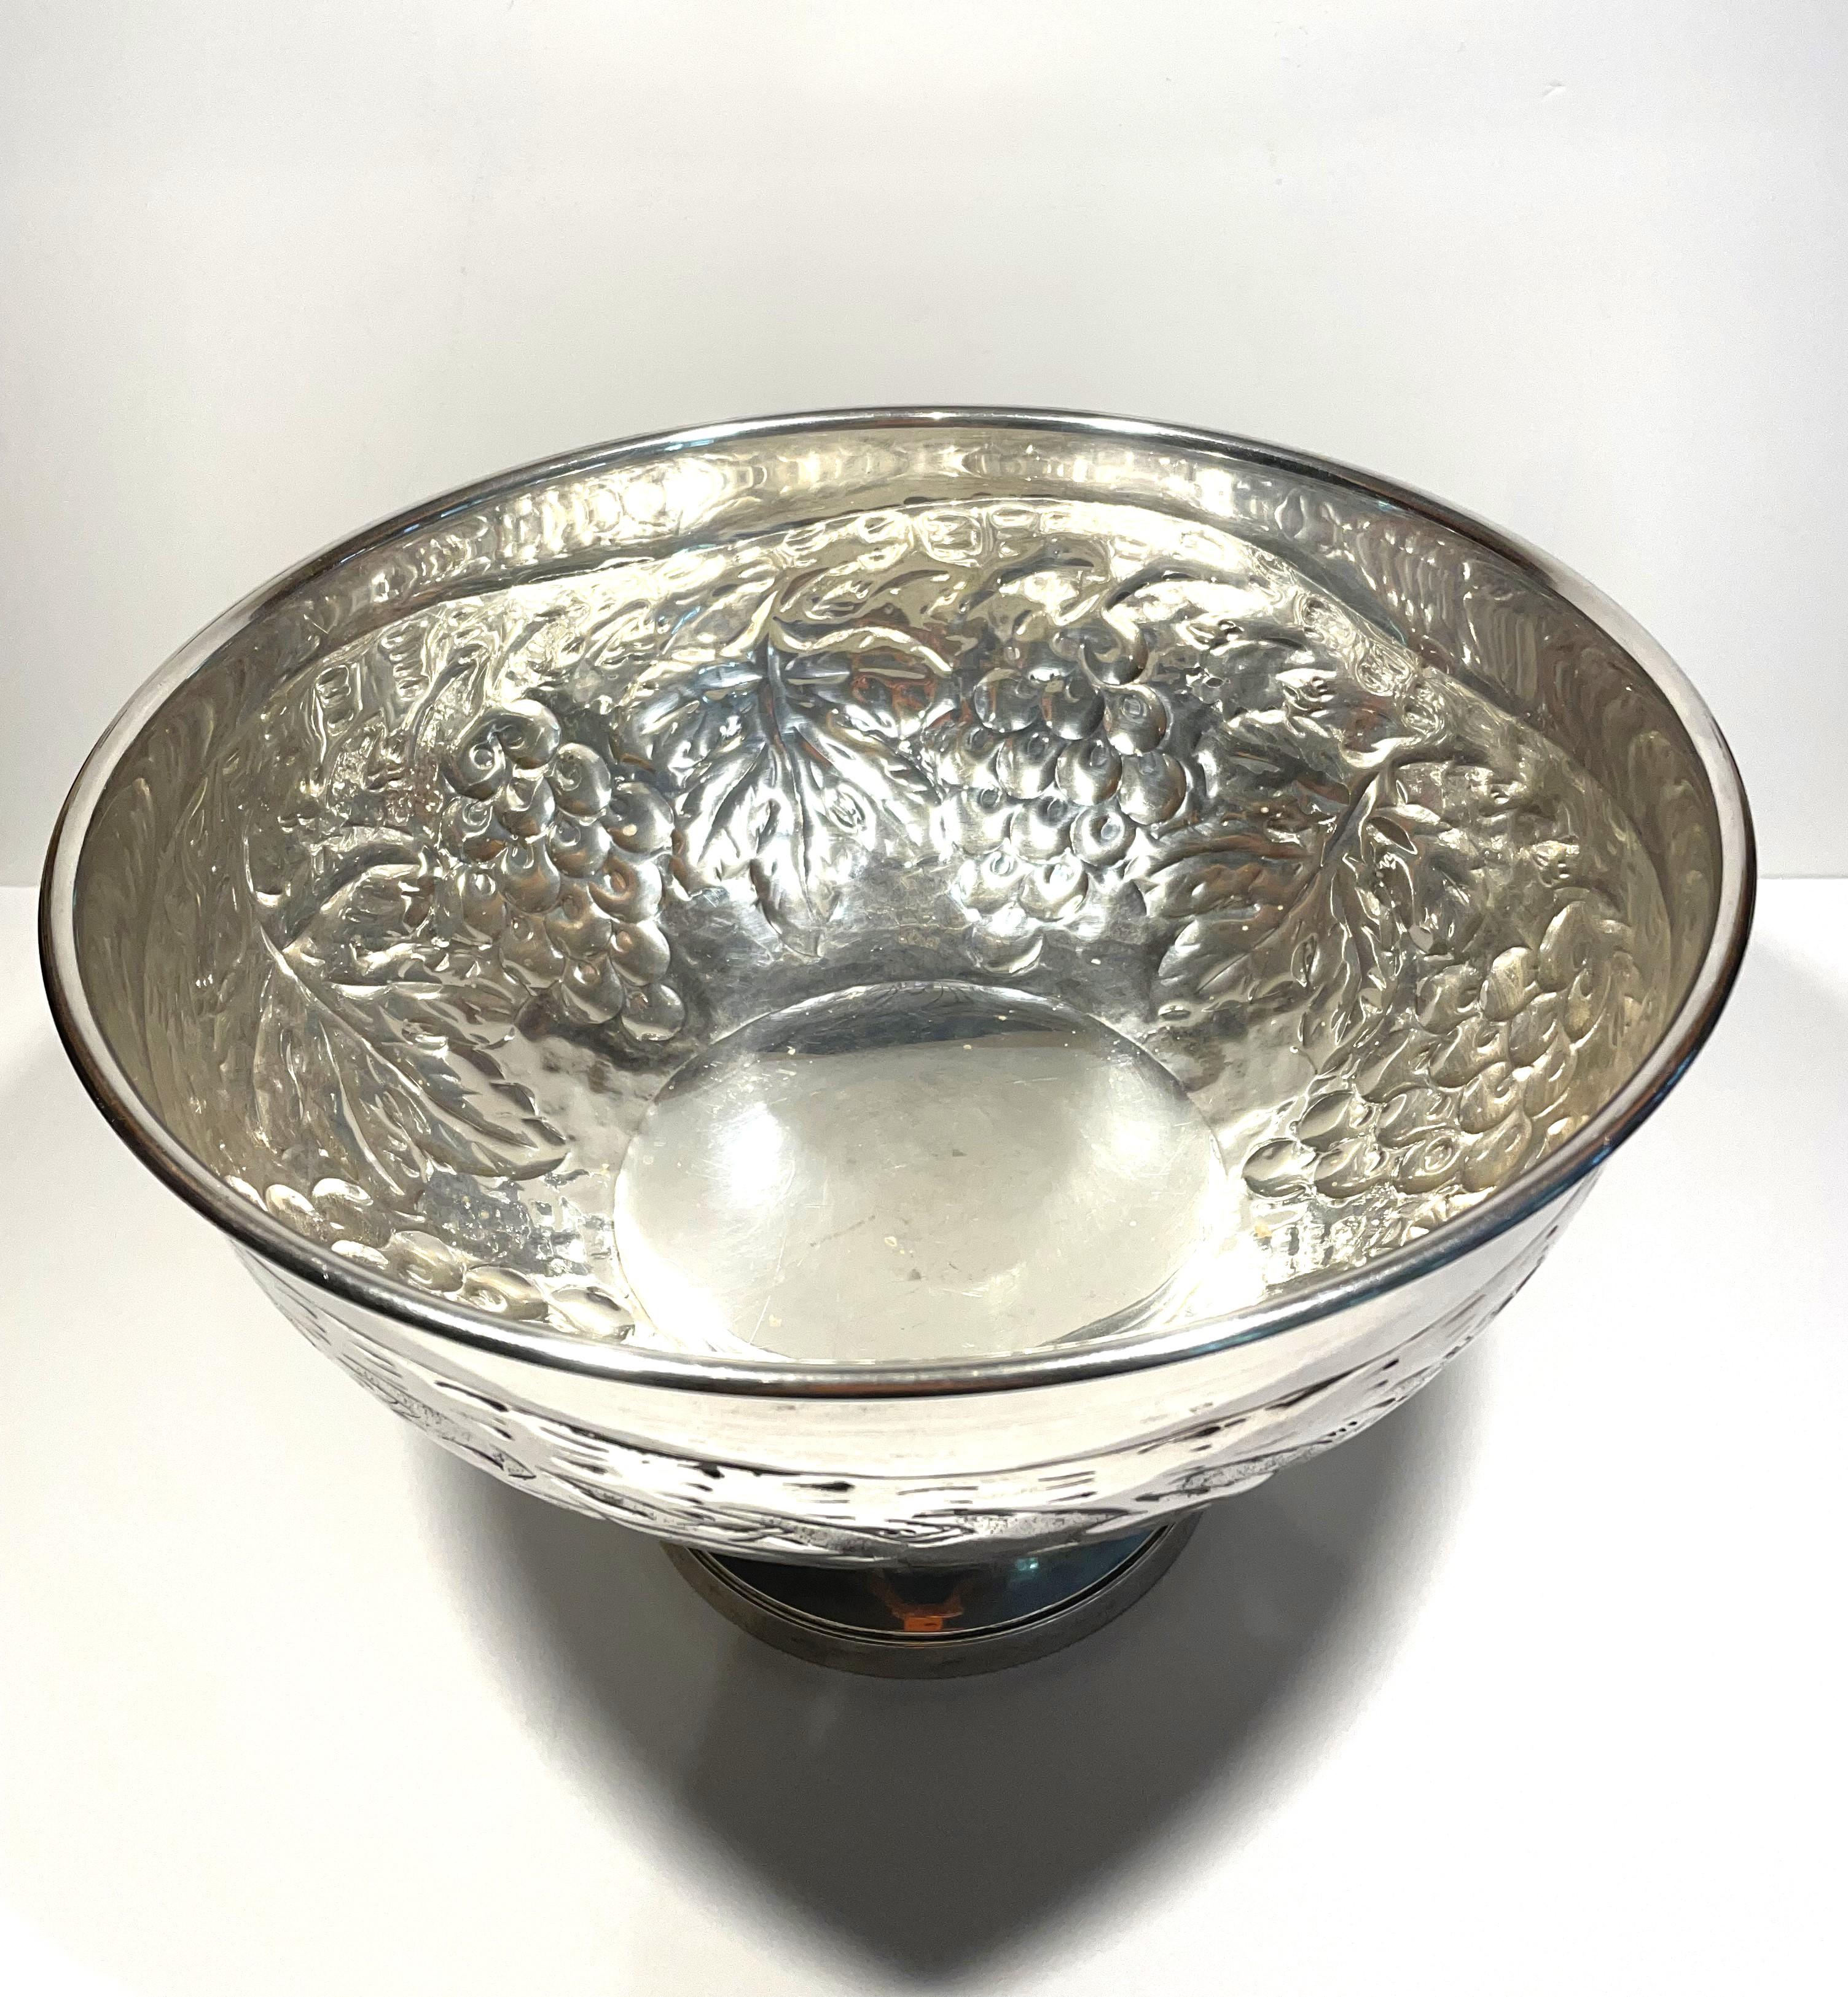 Mexican Vintage Artisanal Silver Urn For Sale